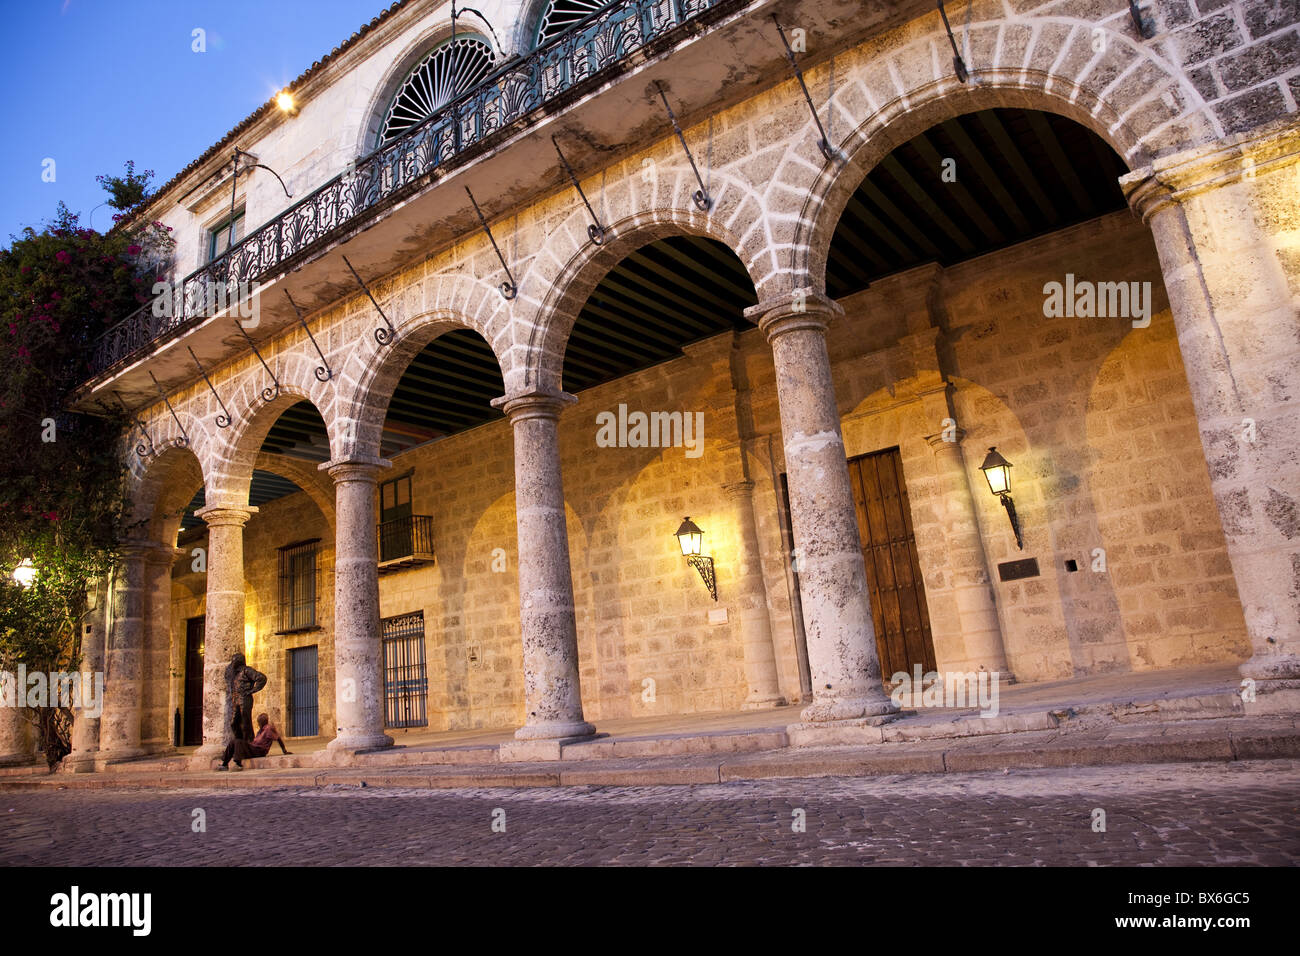 Built in 1700s exterior portico connecting two palaces, in Plaza de la Catedral, Old Havana, UNESCO World Heritage Site, Cuba Stock Photo